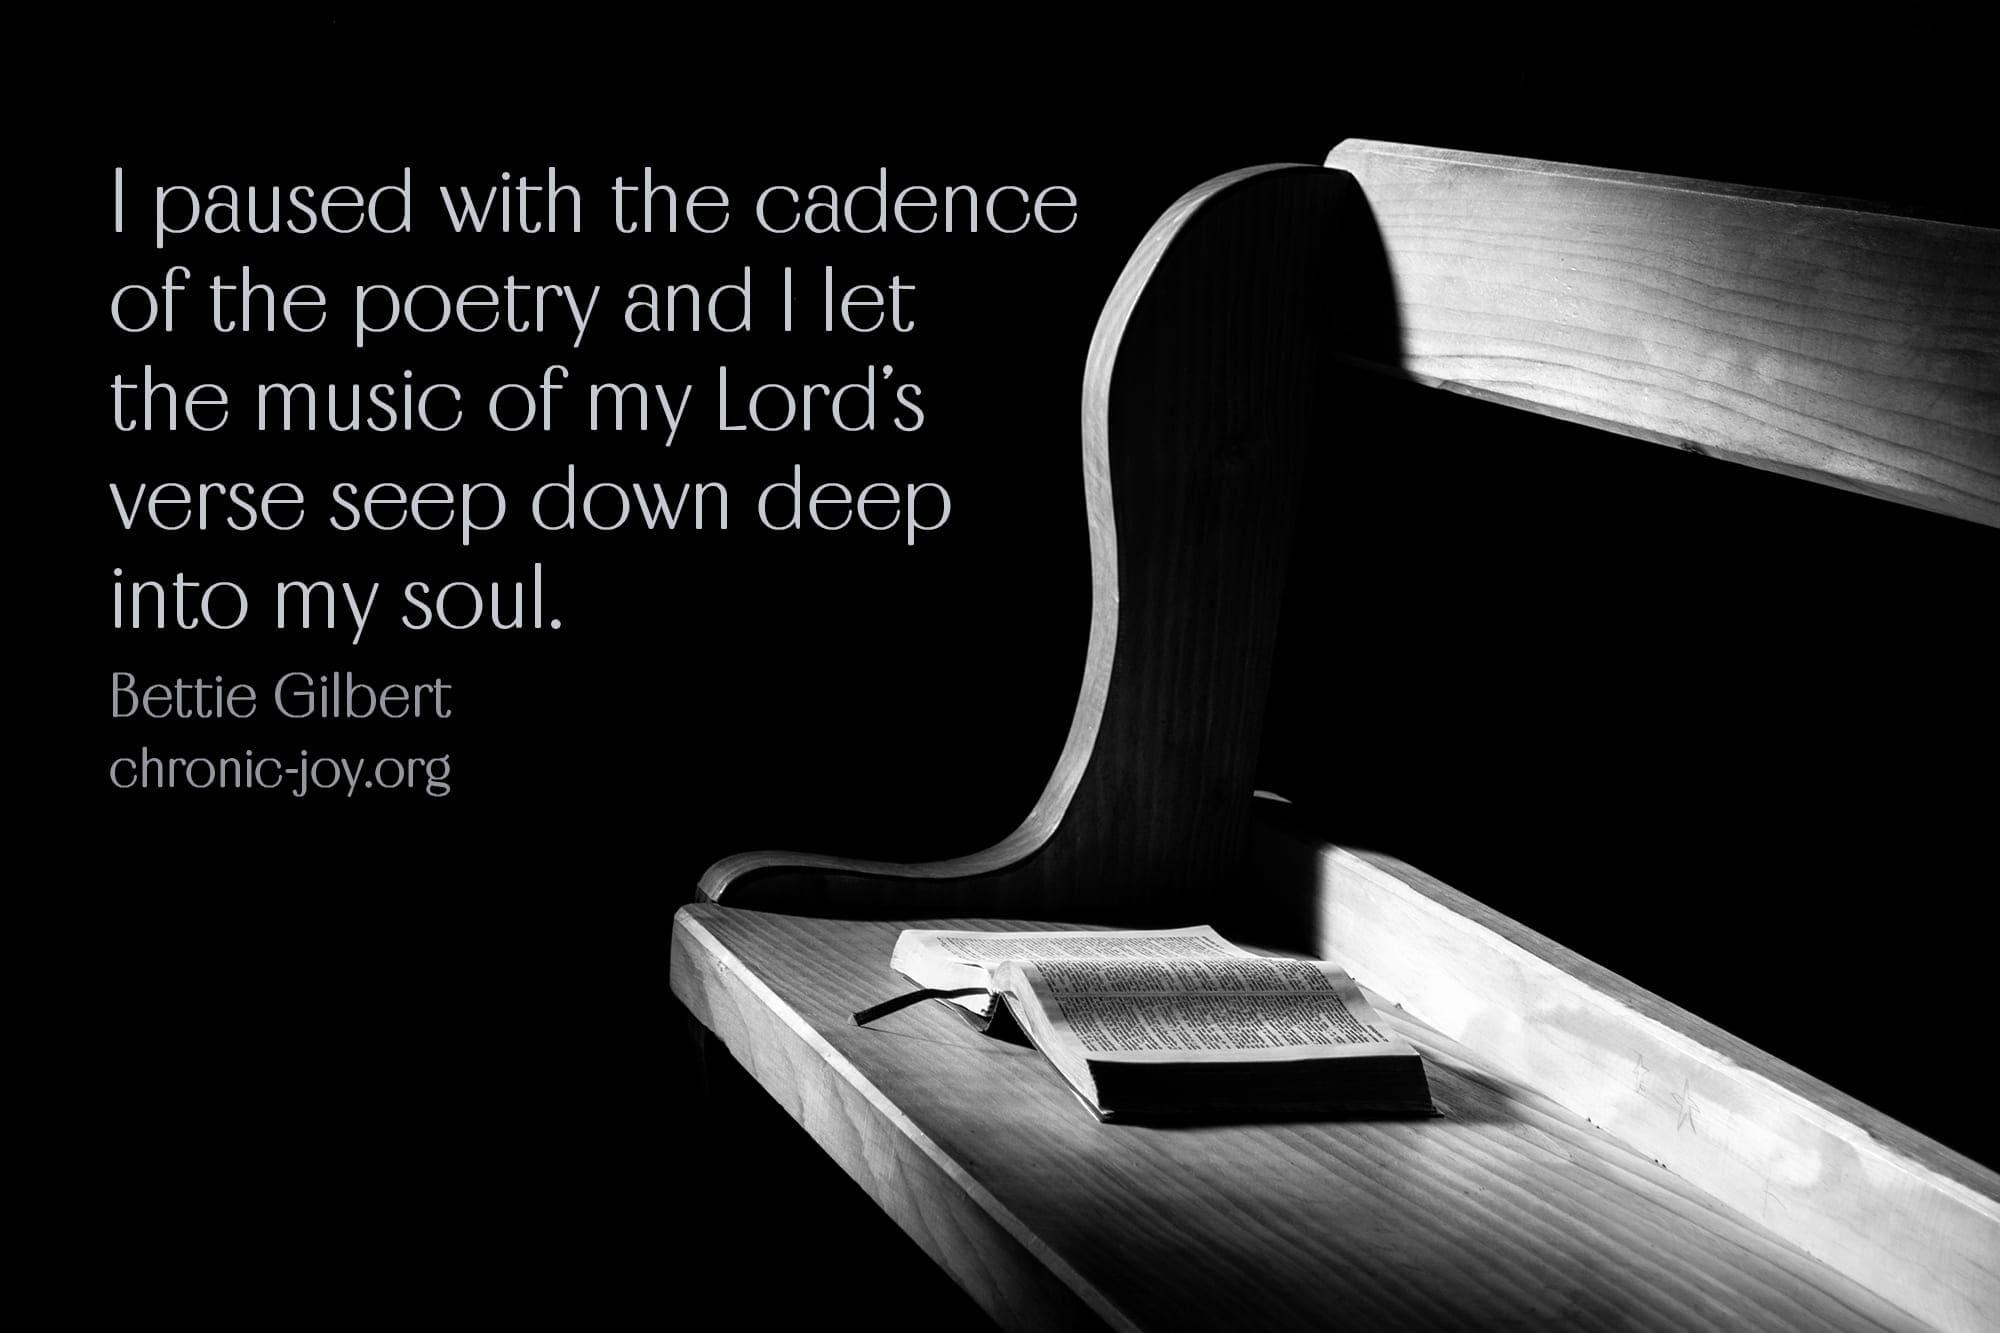 "I paused with the cadence of the poetry and I let the music of my Lord's verse seep down deep into my soul." Bettie Gilbert